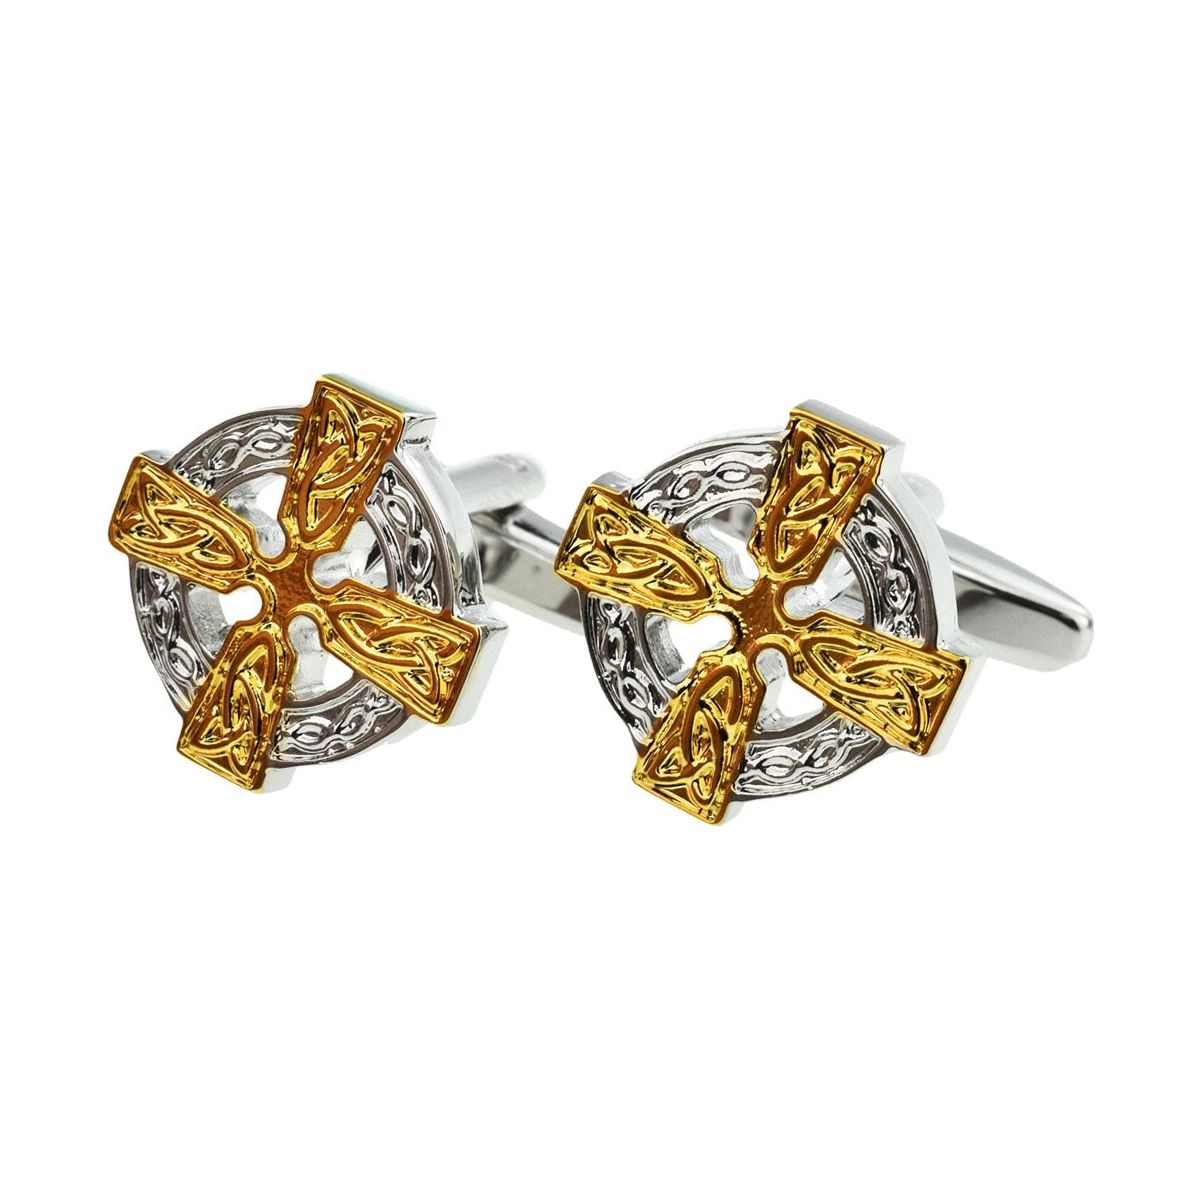 Two Tone Celtic Round Cross Cufflinks - Ashton and Finch